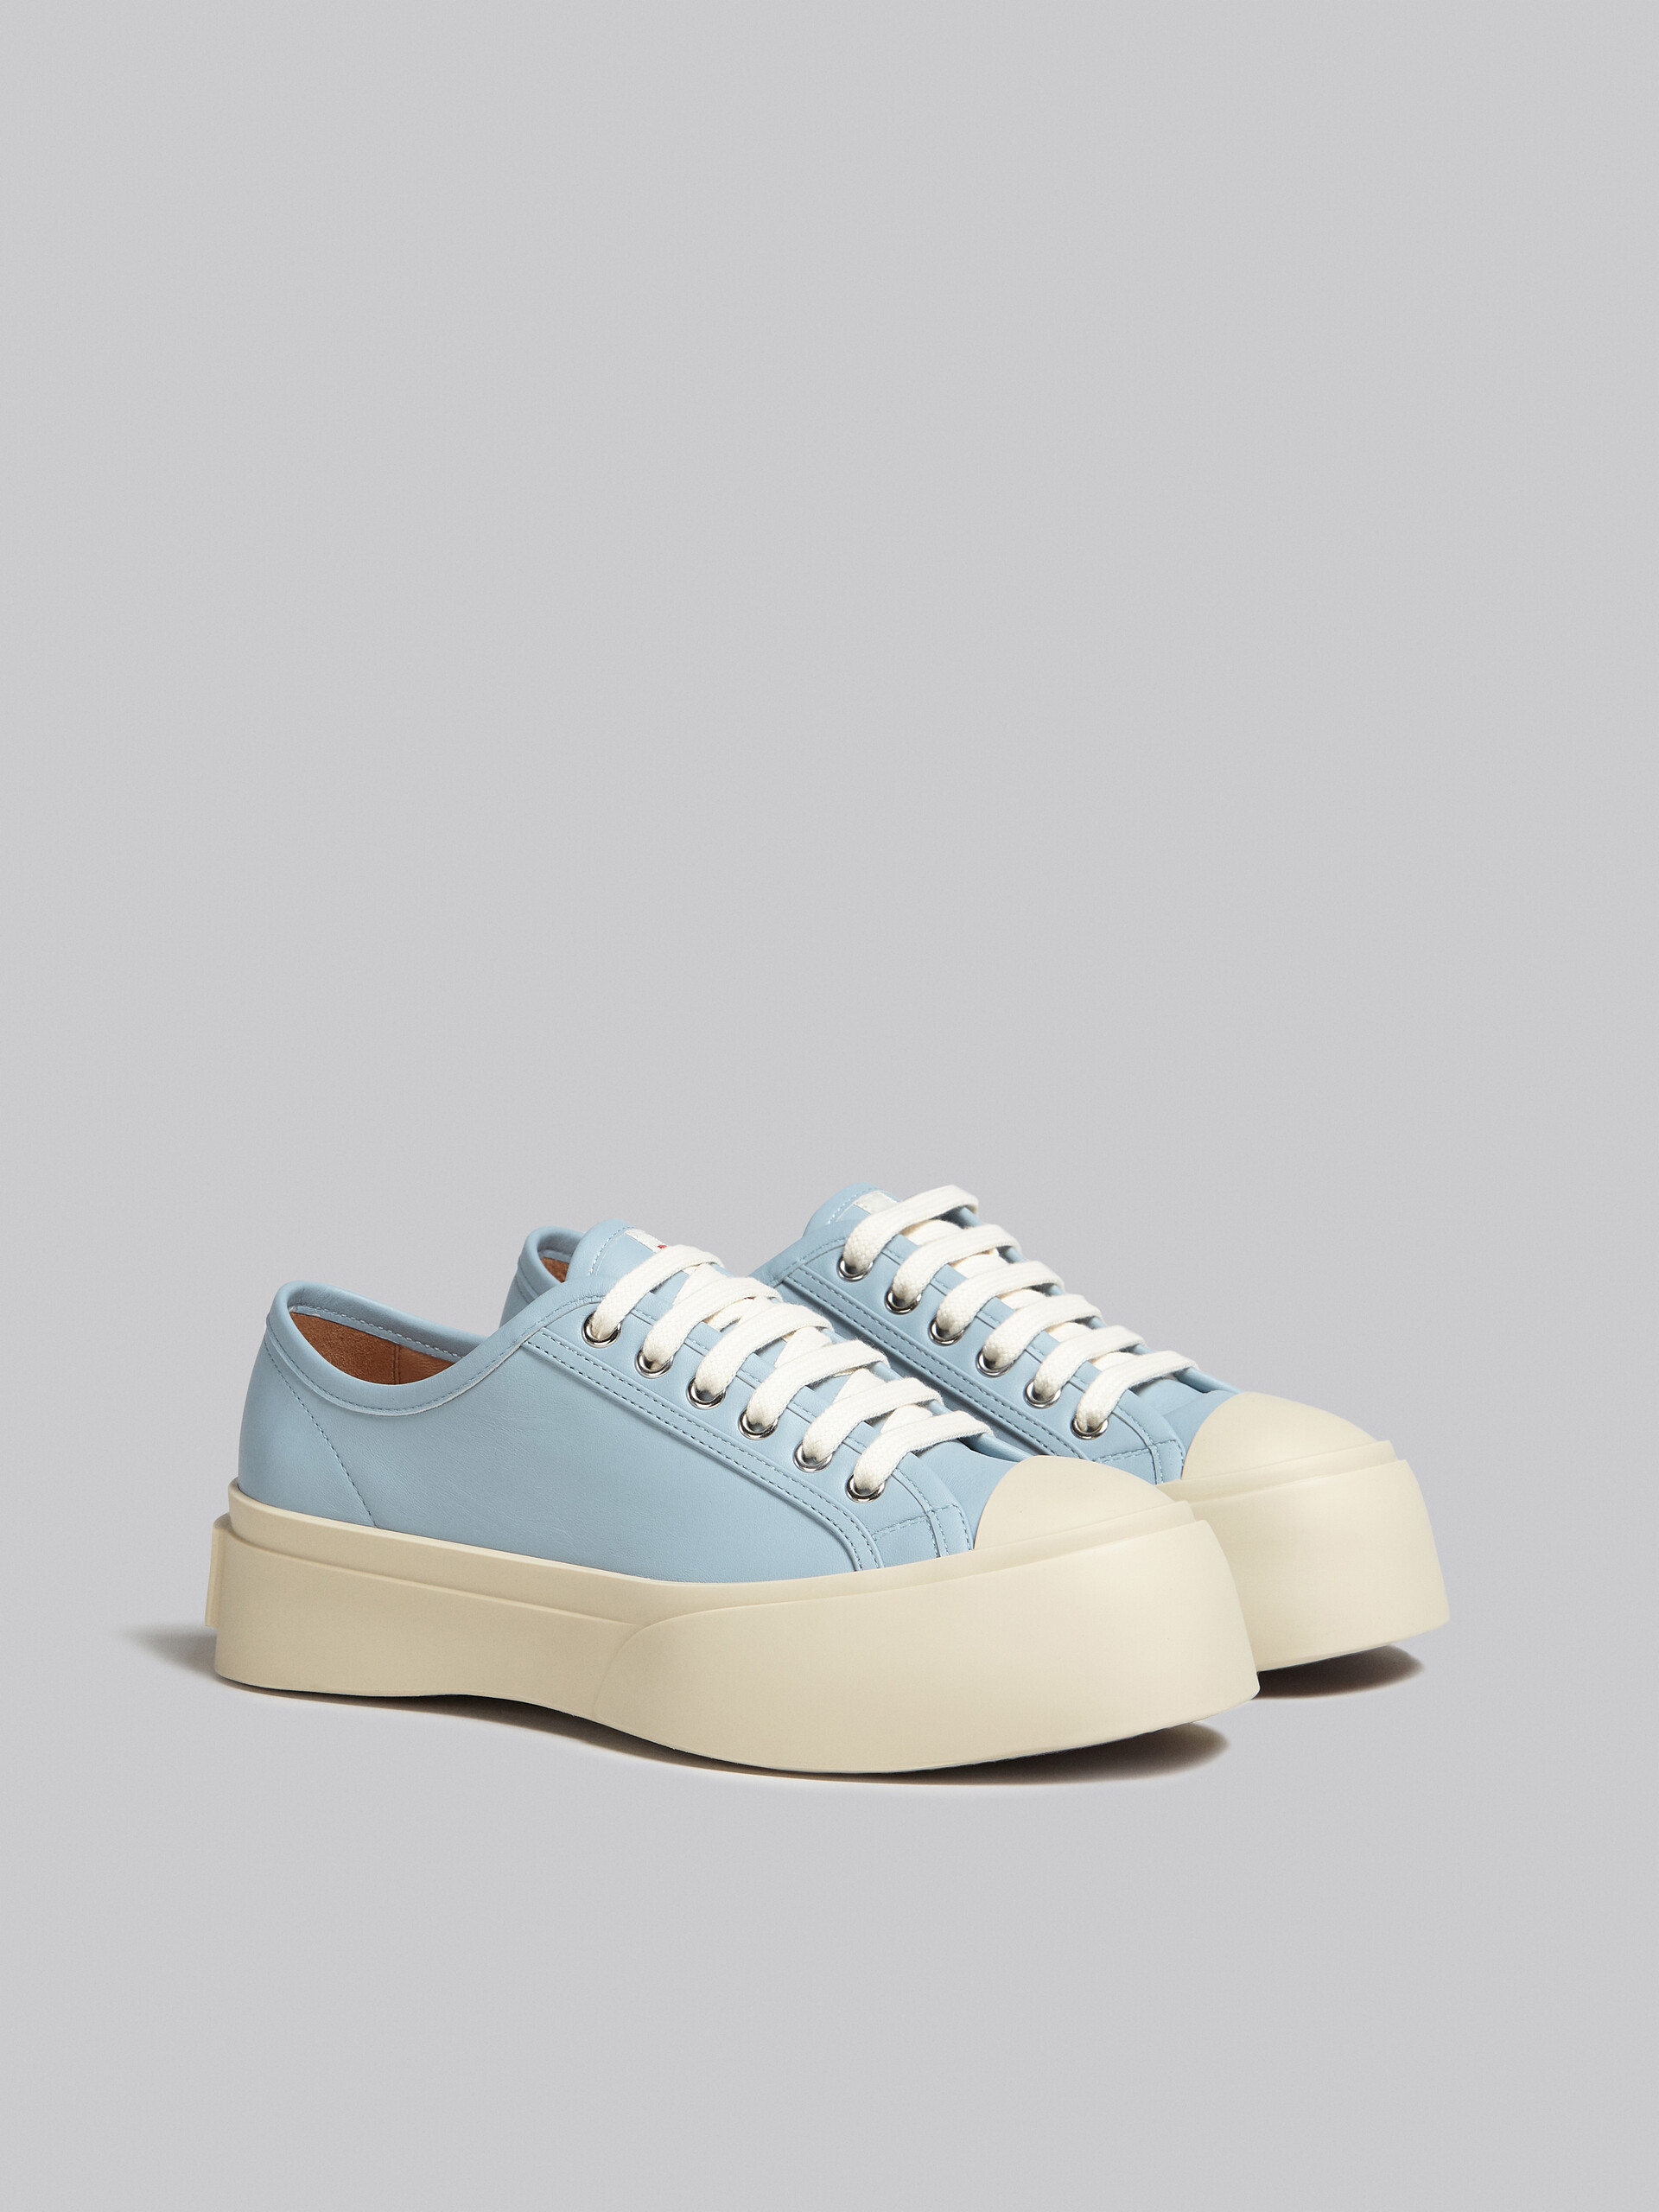 Light blue nappa leather Pablo lace-up sneaker - Sneakers - Image 2